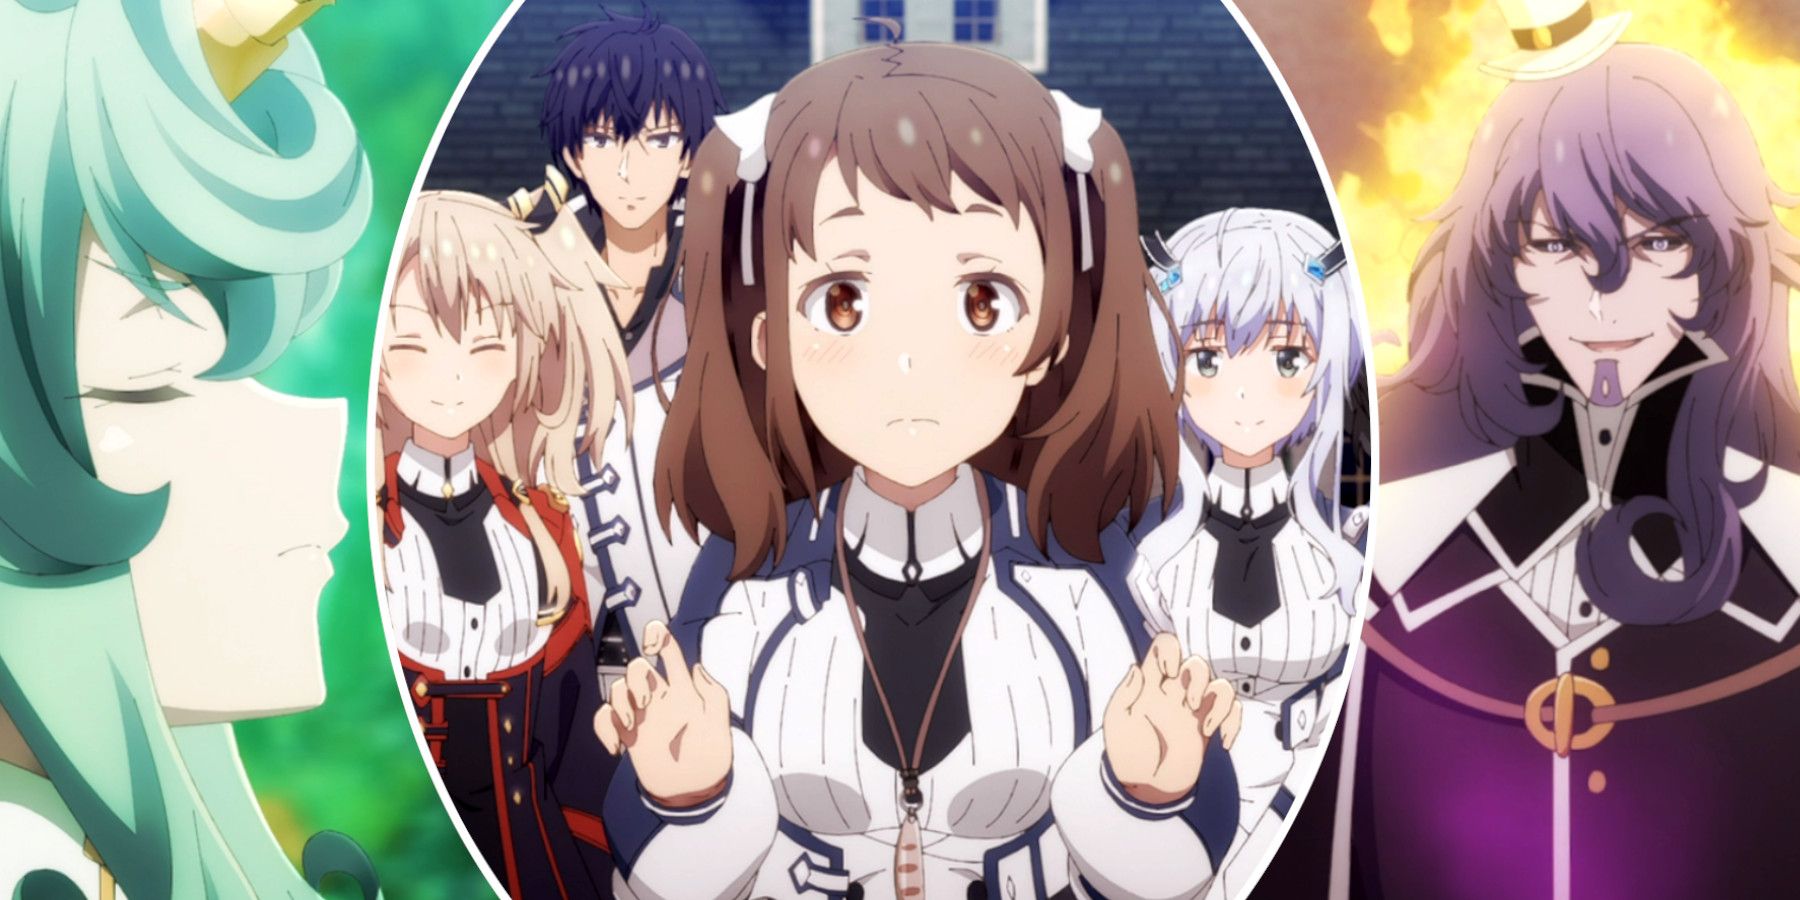 Anime Review: The Misfit of Demon King Academy Episode 1 - Sequential Planet